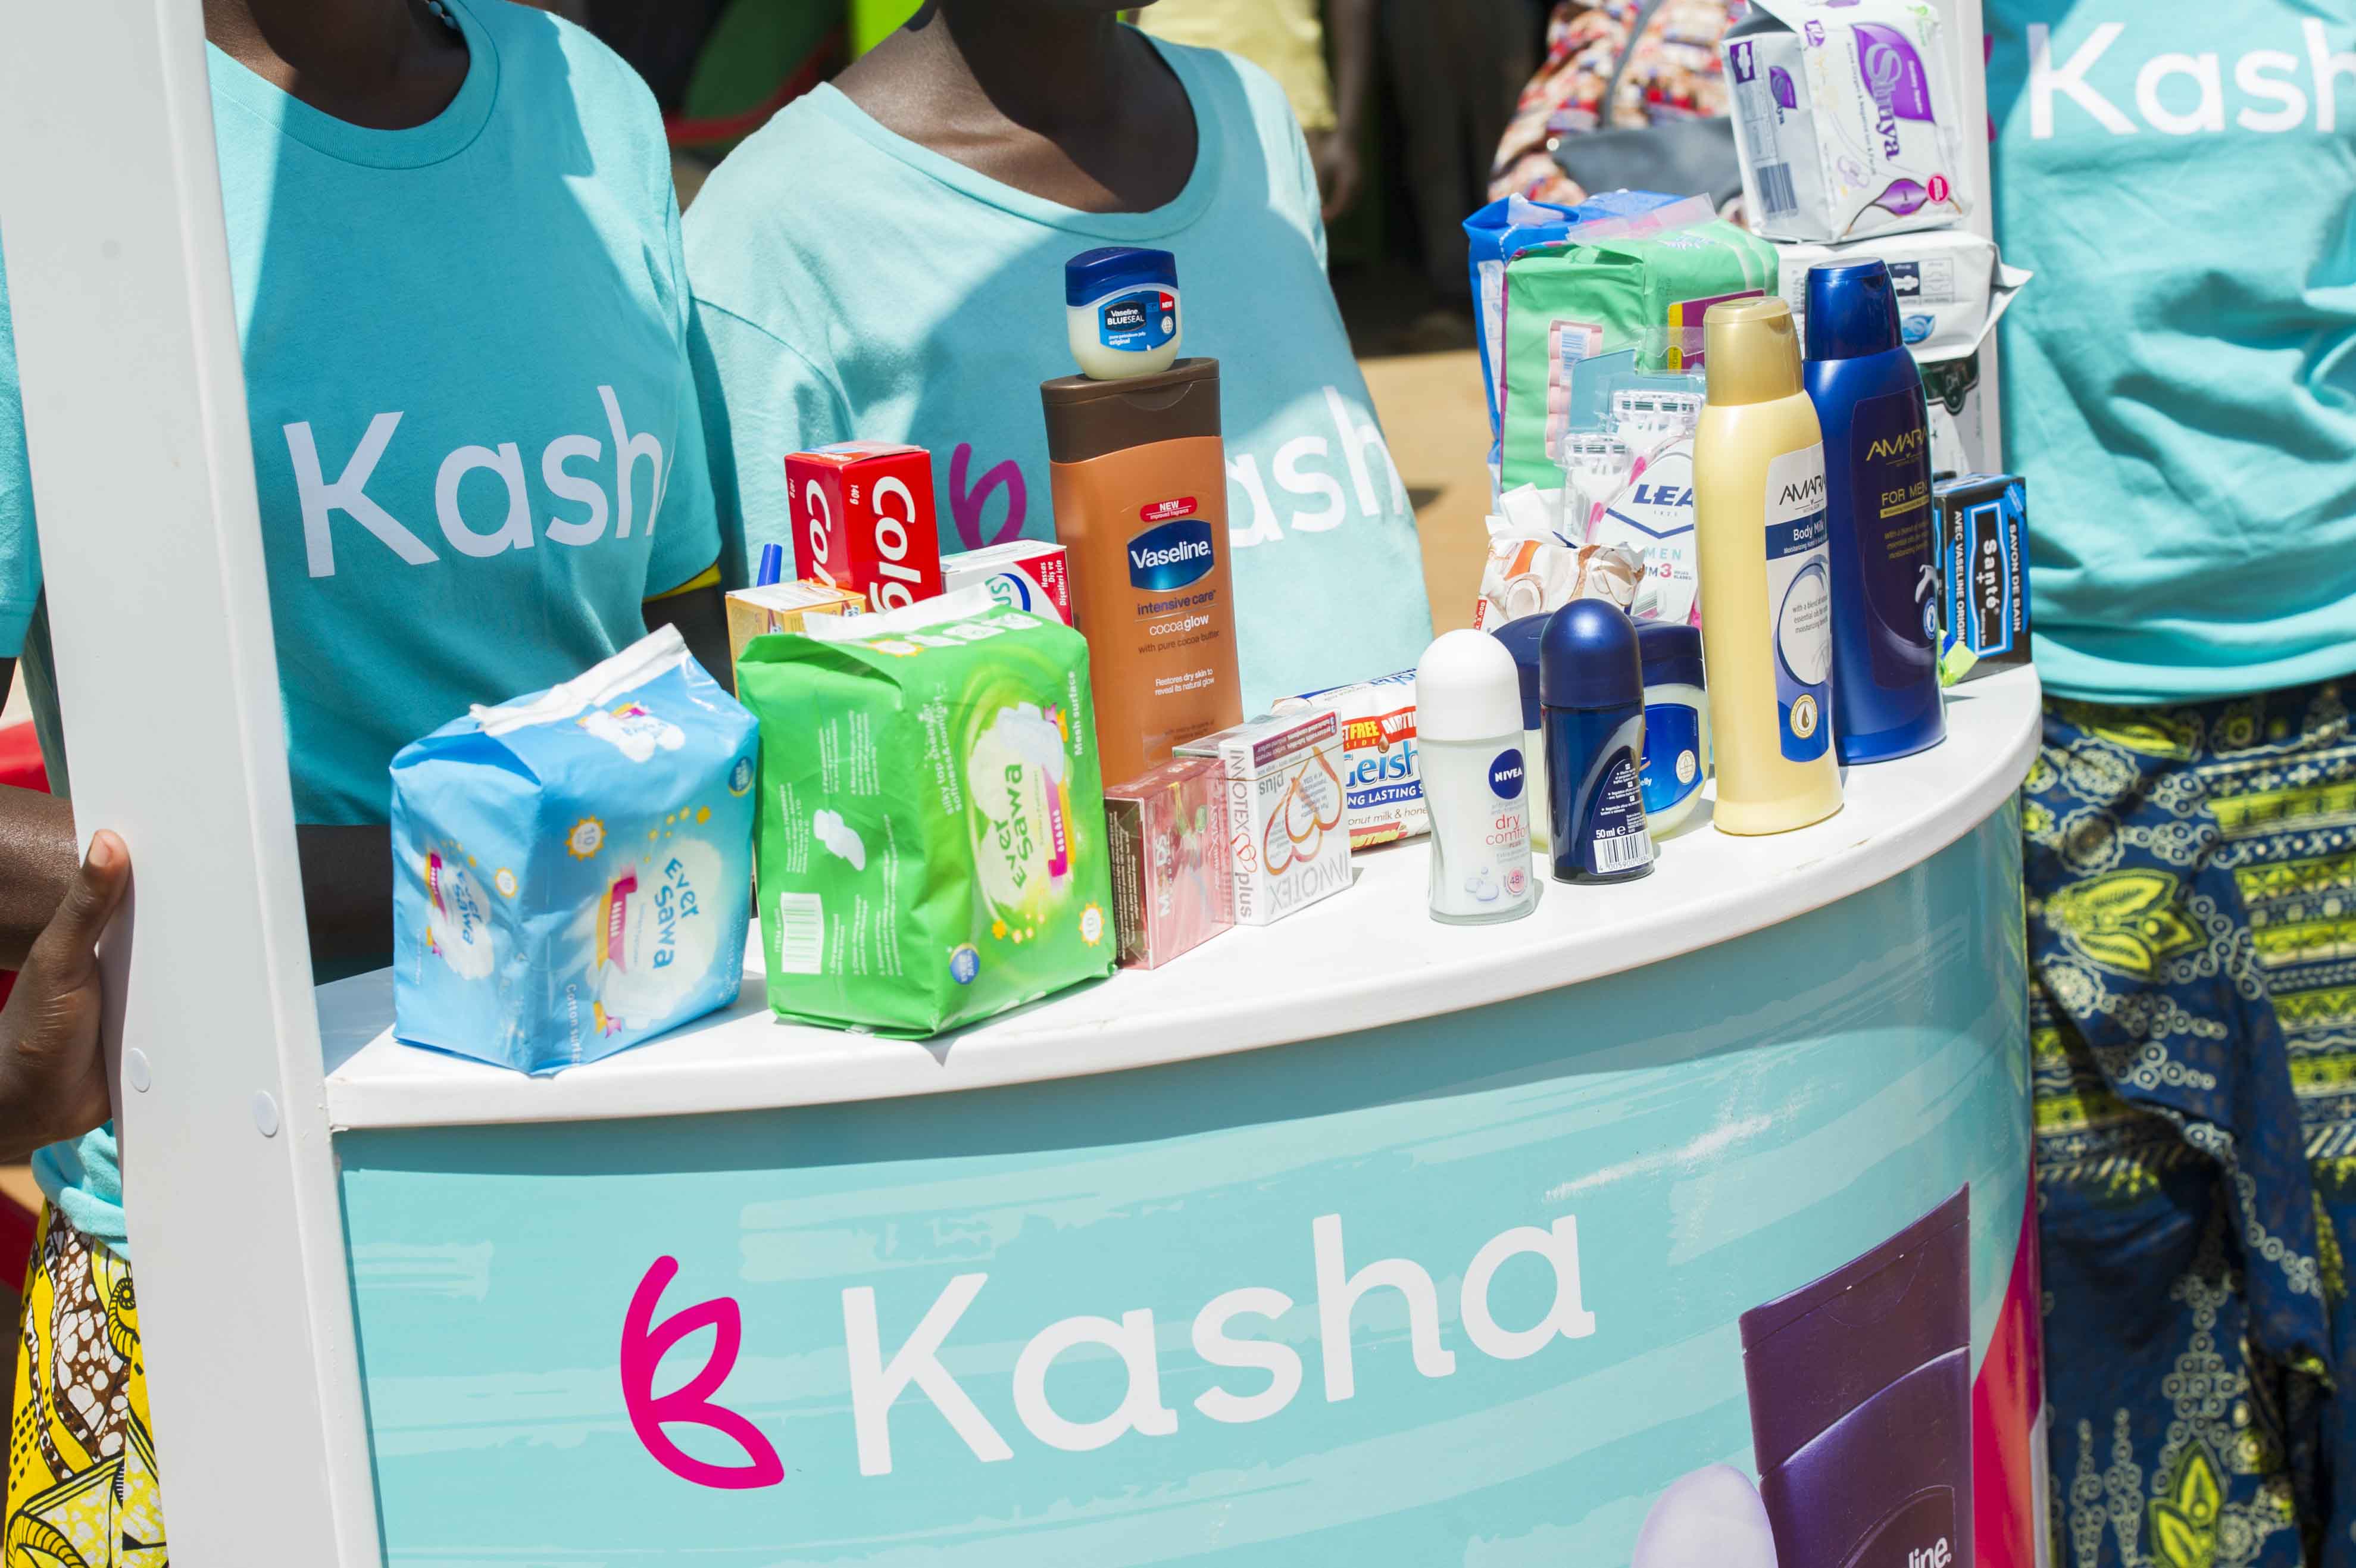 A Kasha stand at a community outreach event focusing on personal care awareness.